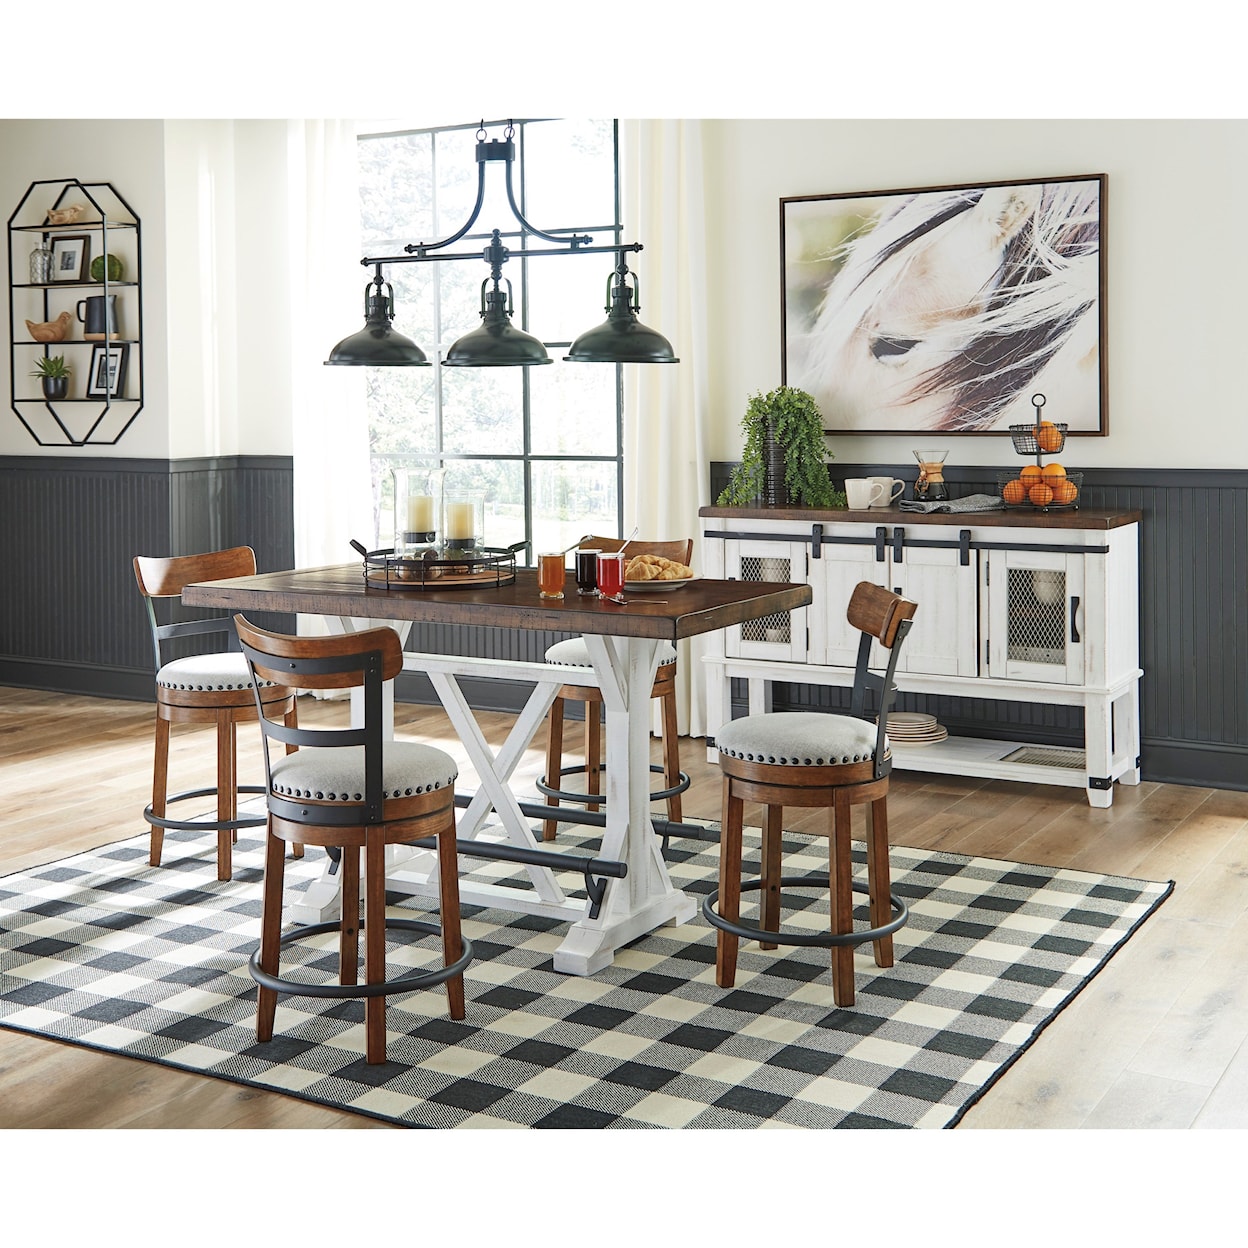 Benchcraft Valebeck Casual Dining Room Group